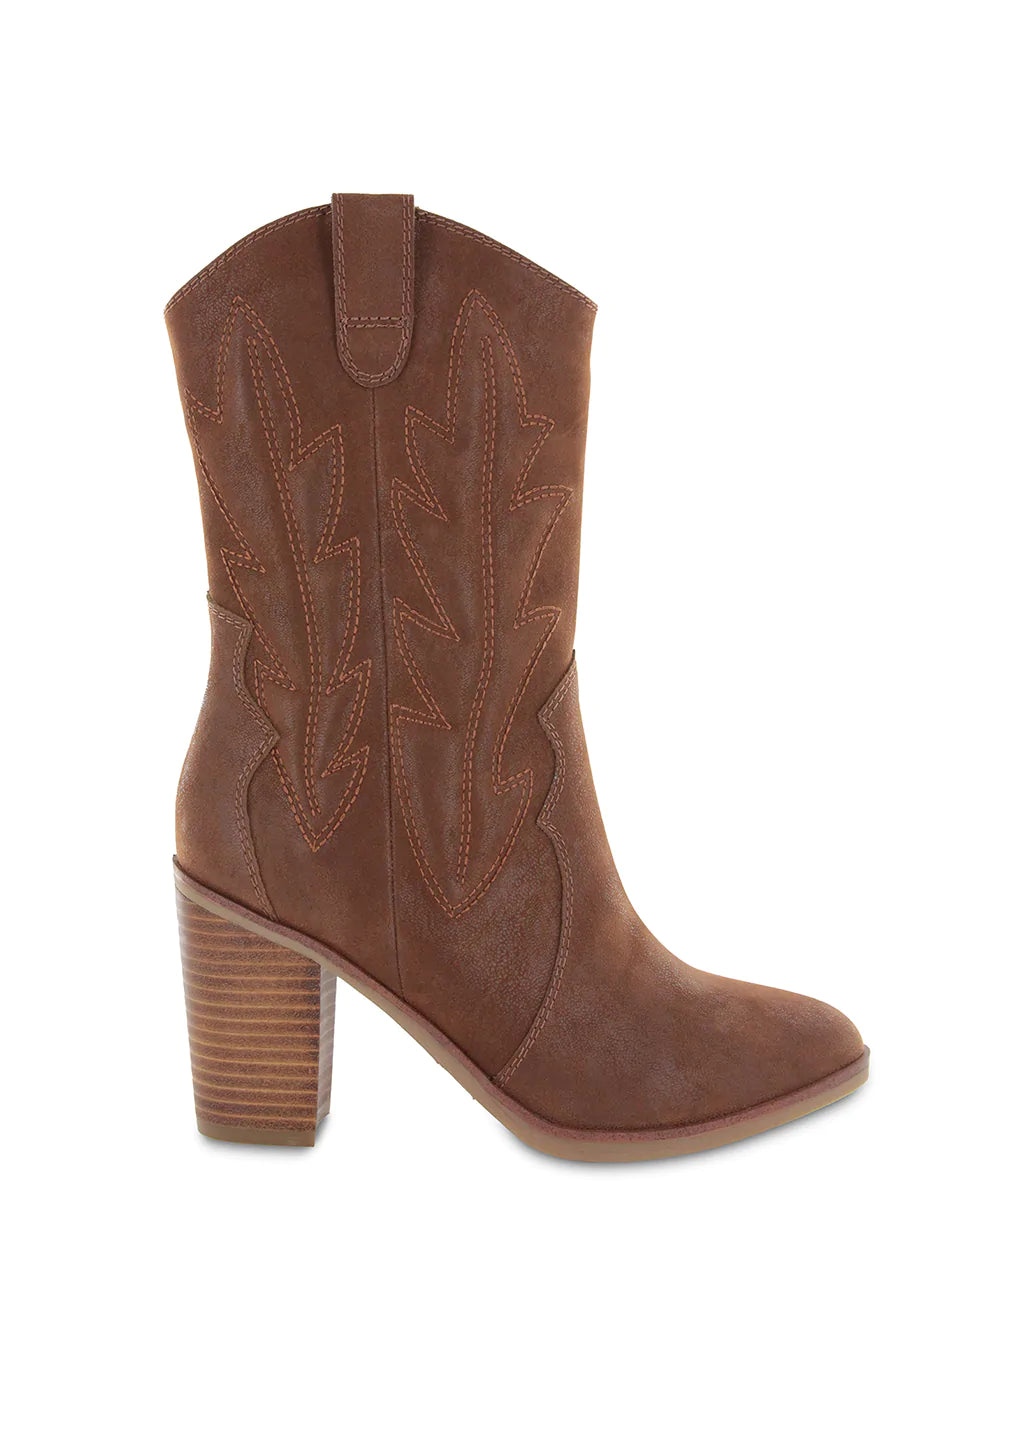 The Raylyn Boot